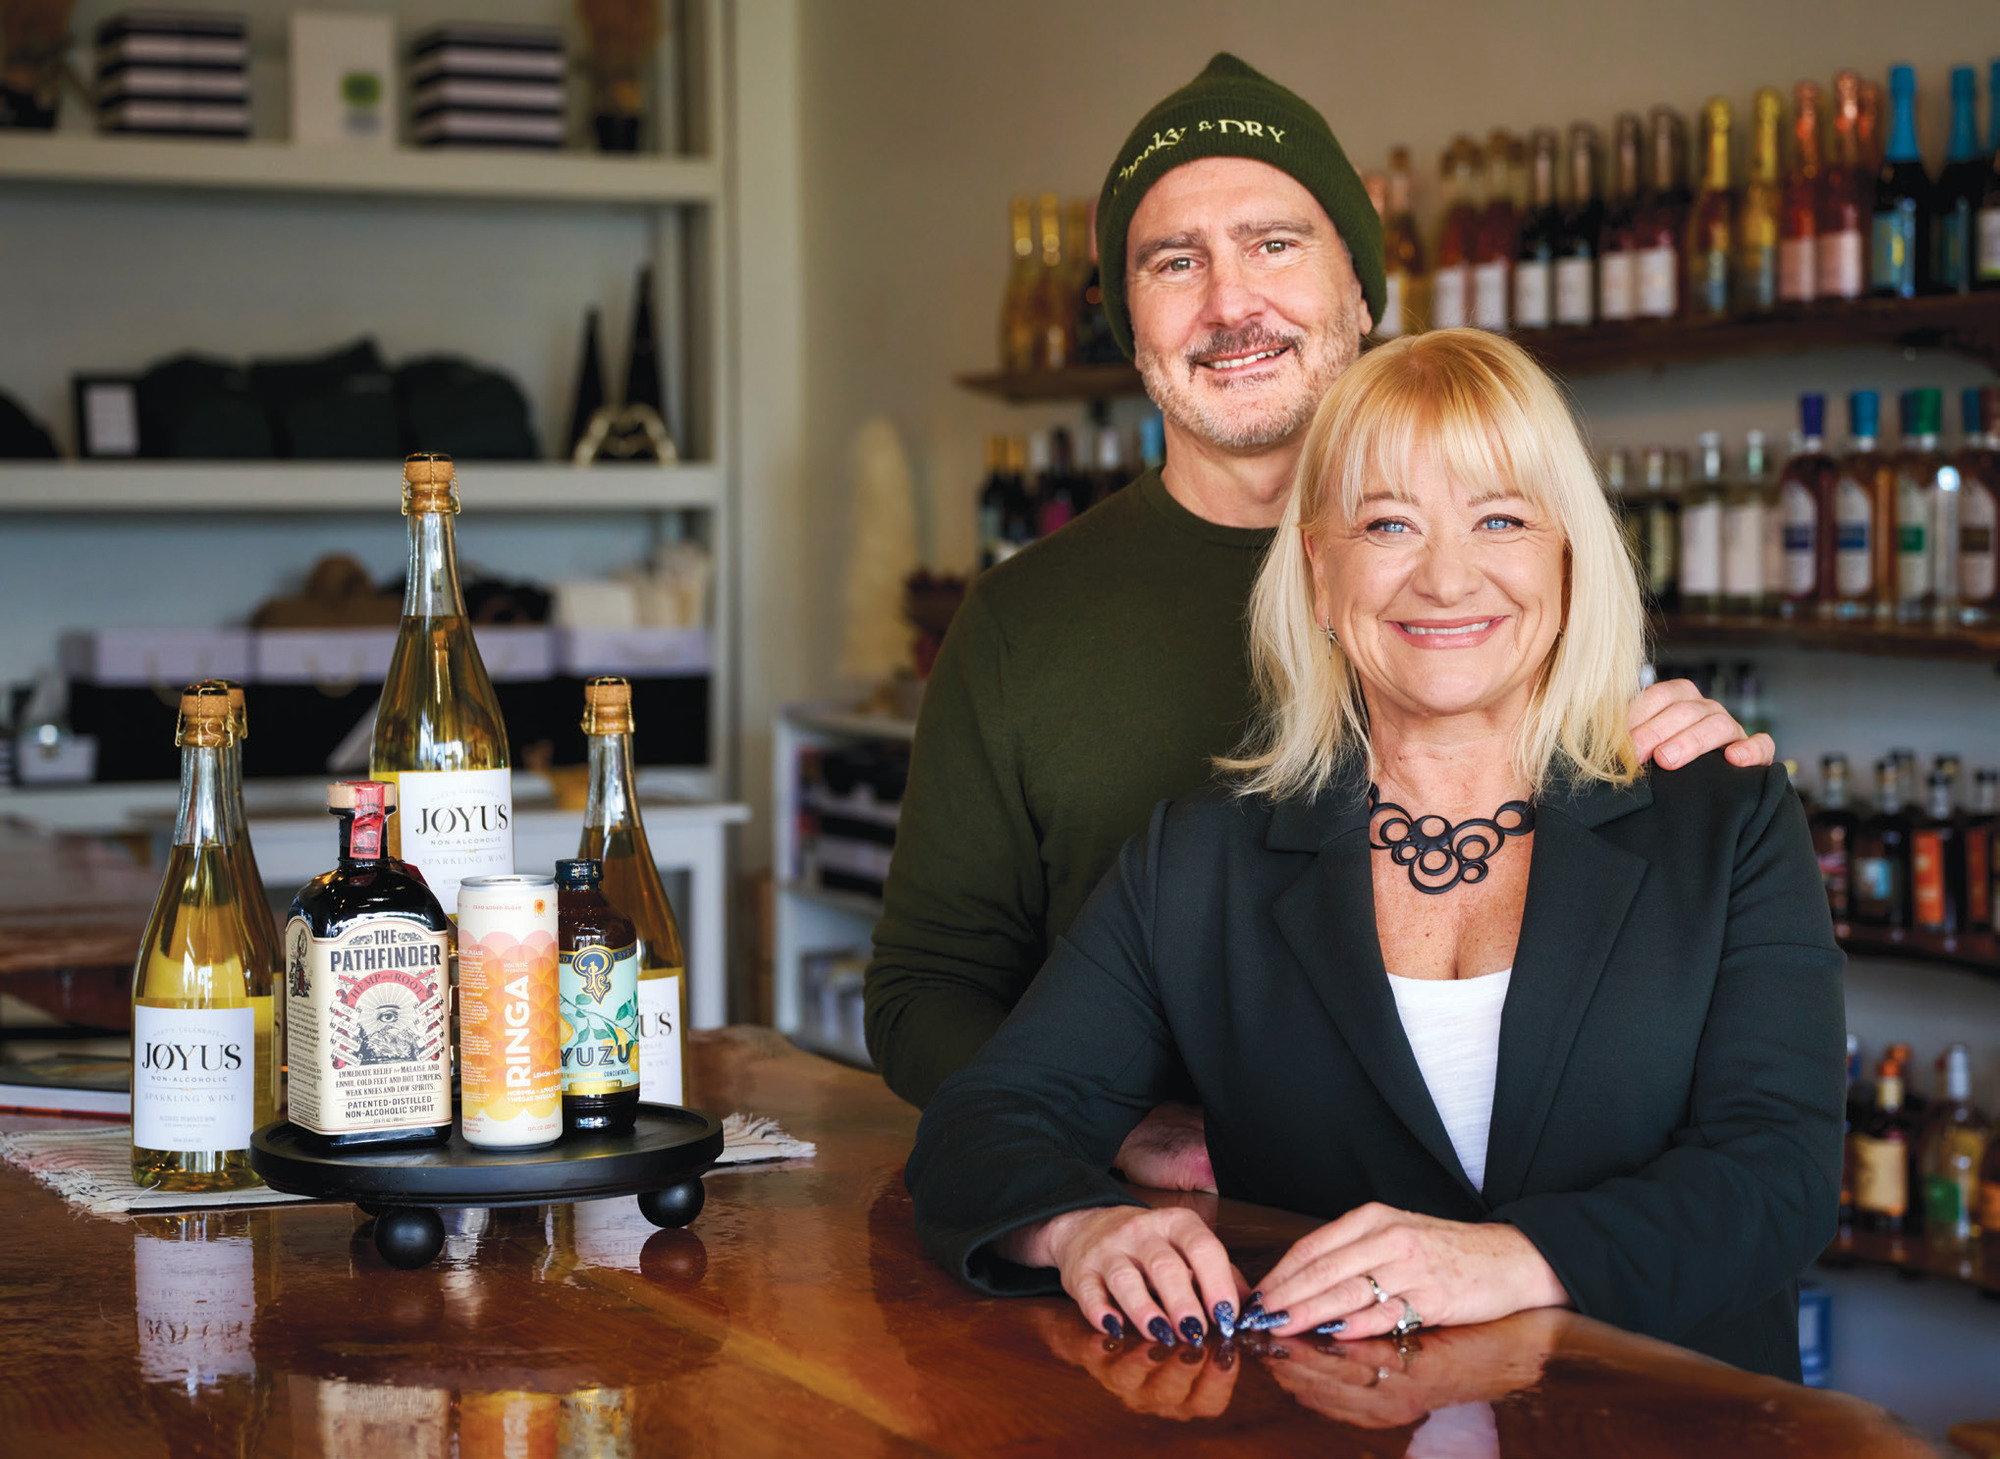 After opting to pursue a healthier lifestyle, Yura (left) and Kirstin Vracko noticed a gap in the market for elevated NA options, and the two opened Cheeky & Dry, a nonalcoholic bottle shop.